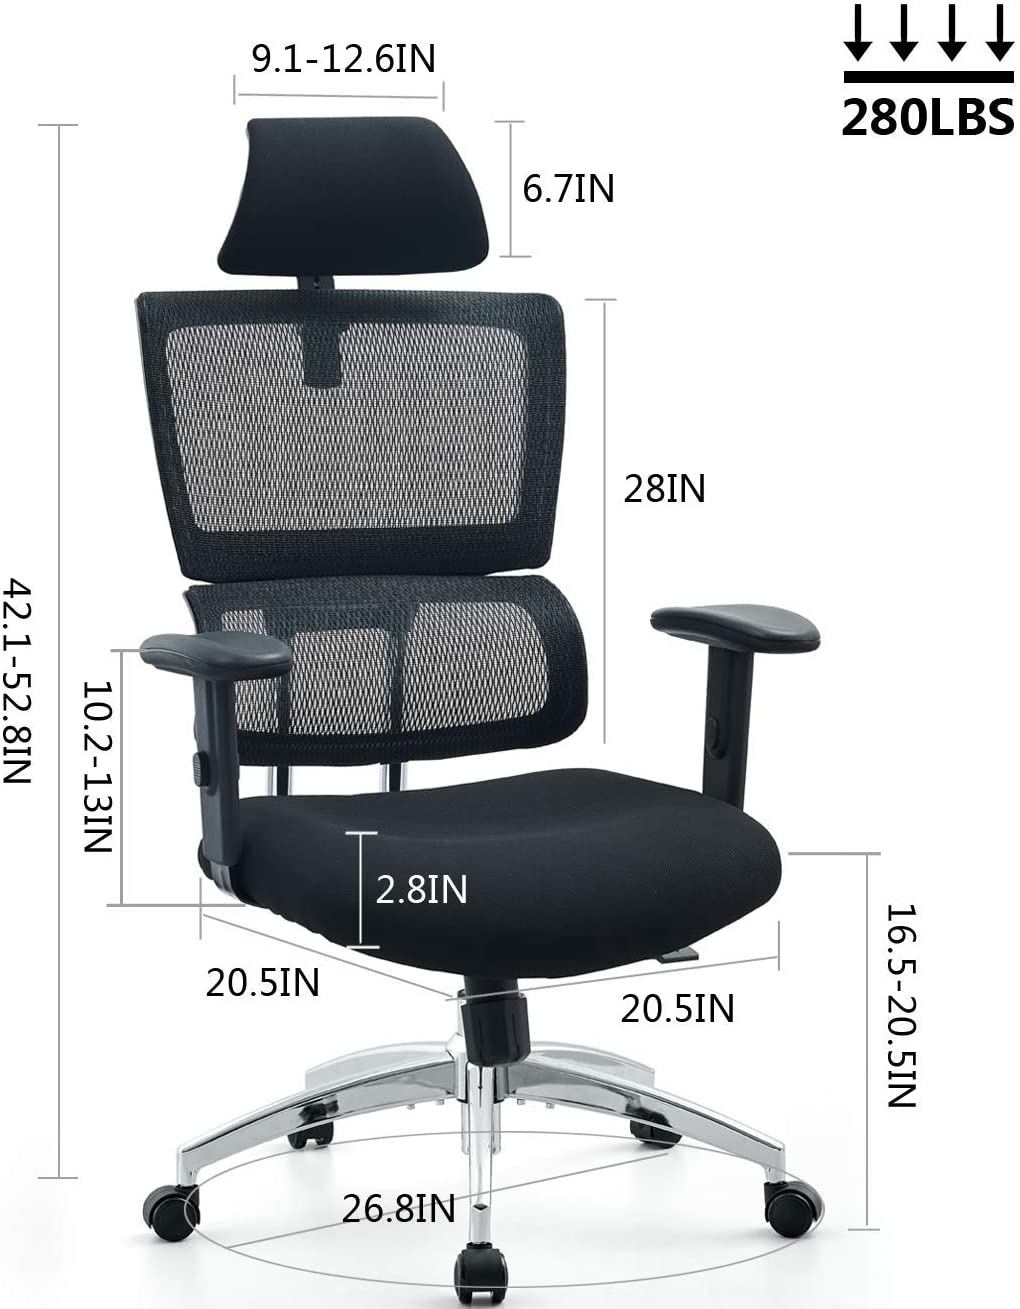 Ticova Ergonomic Office Chair - High Back Desk Chair with Elastic Lumbar Support & Thick Seat Cushion - 140°Reclining & Rocking Mesh Computer Chair with Adjustable Headrest, Armrest - image 5 of 5